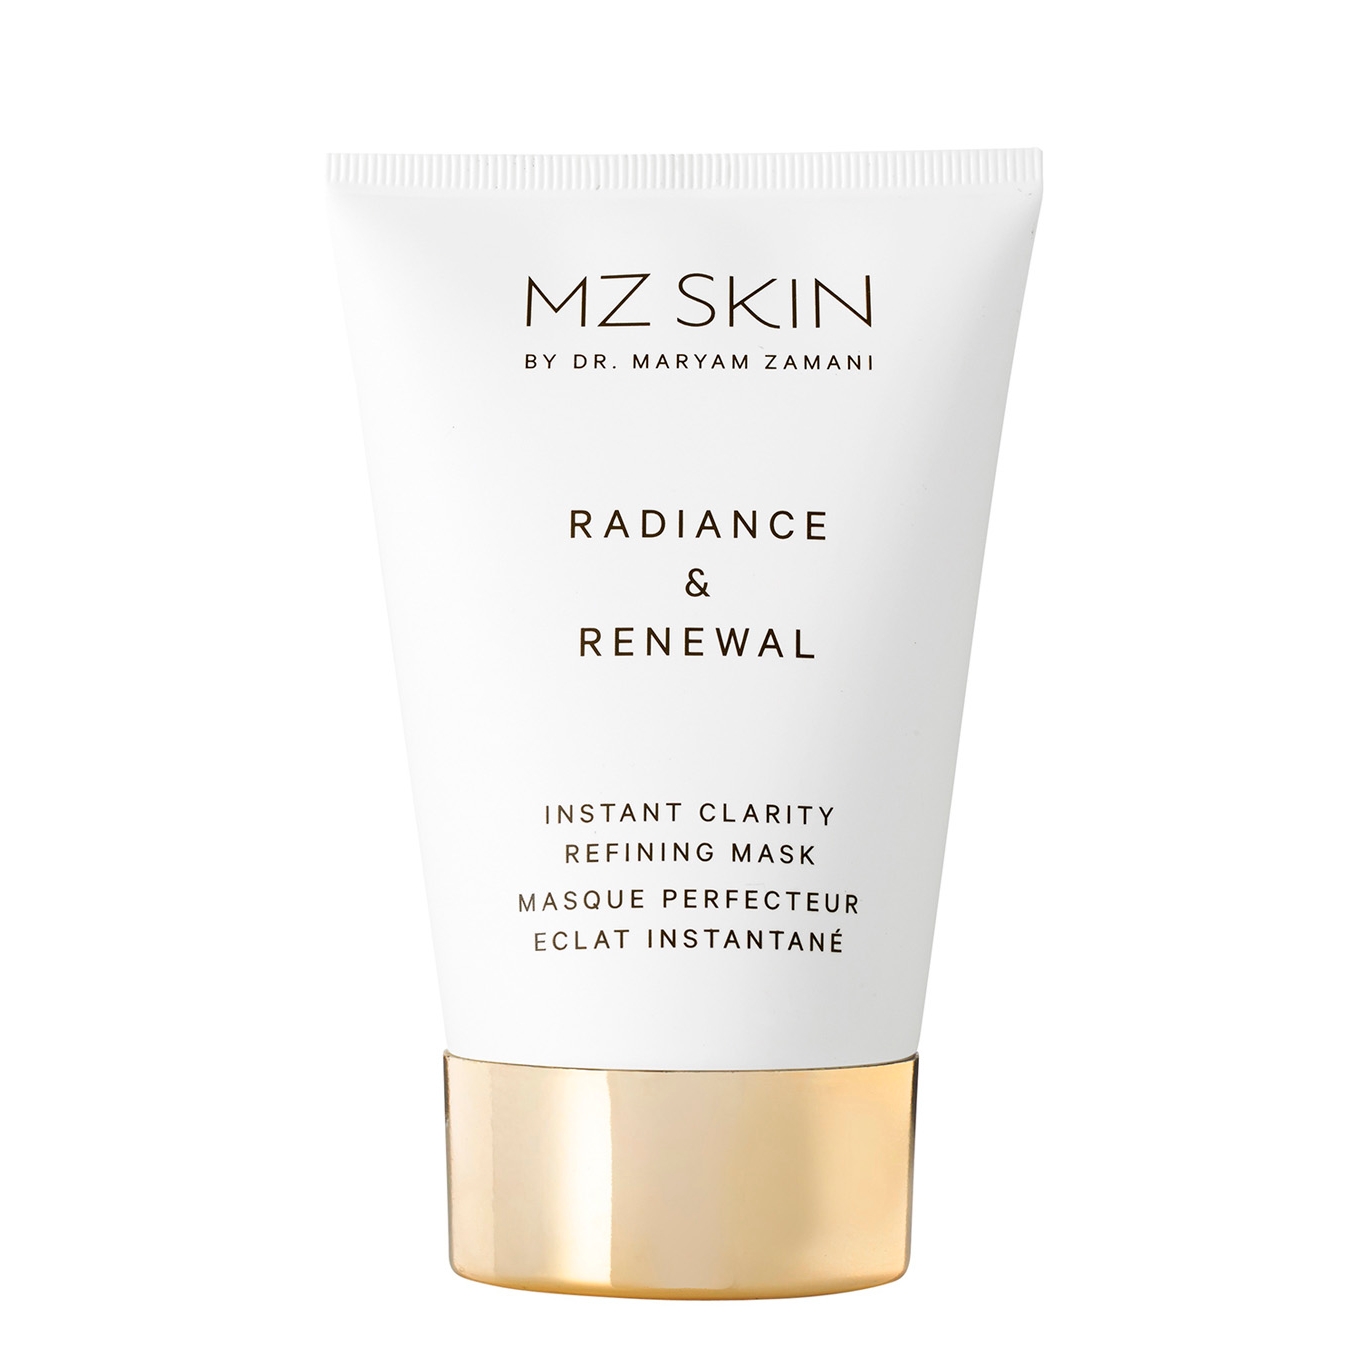 Radiance & Renewal Instant Clarity Refining Mask 100ml